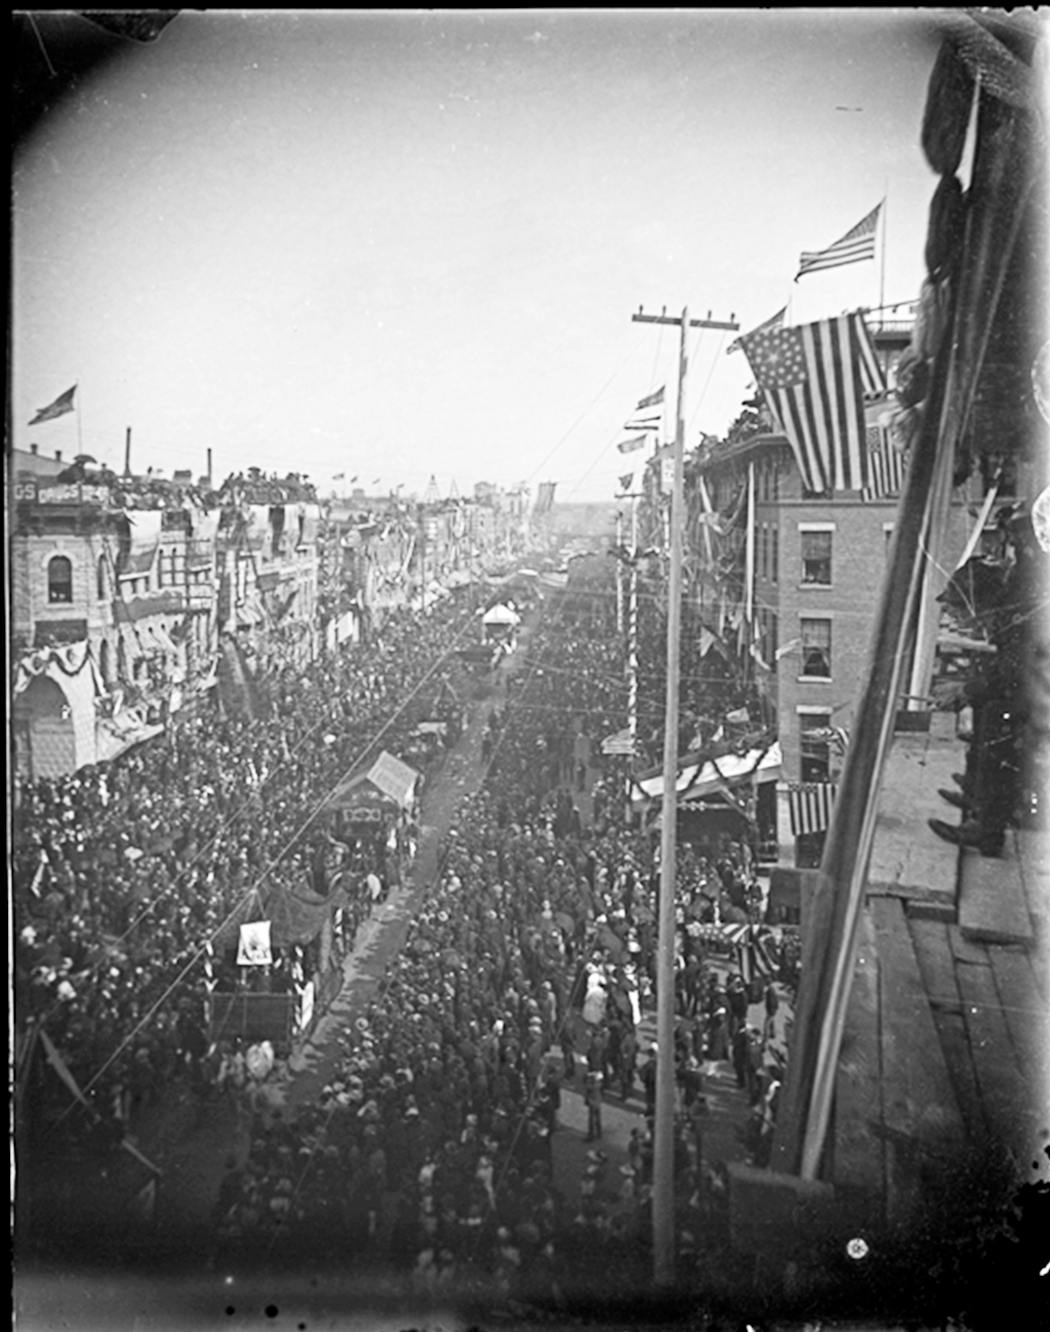 To celebrate completion of the Northern Pacific Railway’s transcontinental line in 1883, the Twin Cities threw a massive daylong bash that attracted many of the area’s 100,000 residents. 